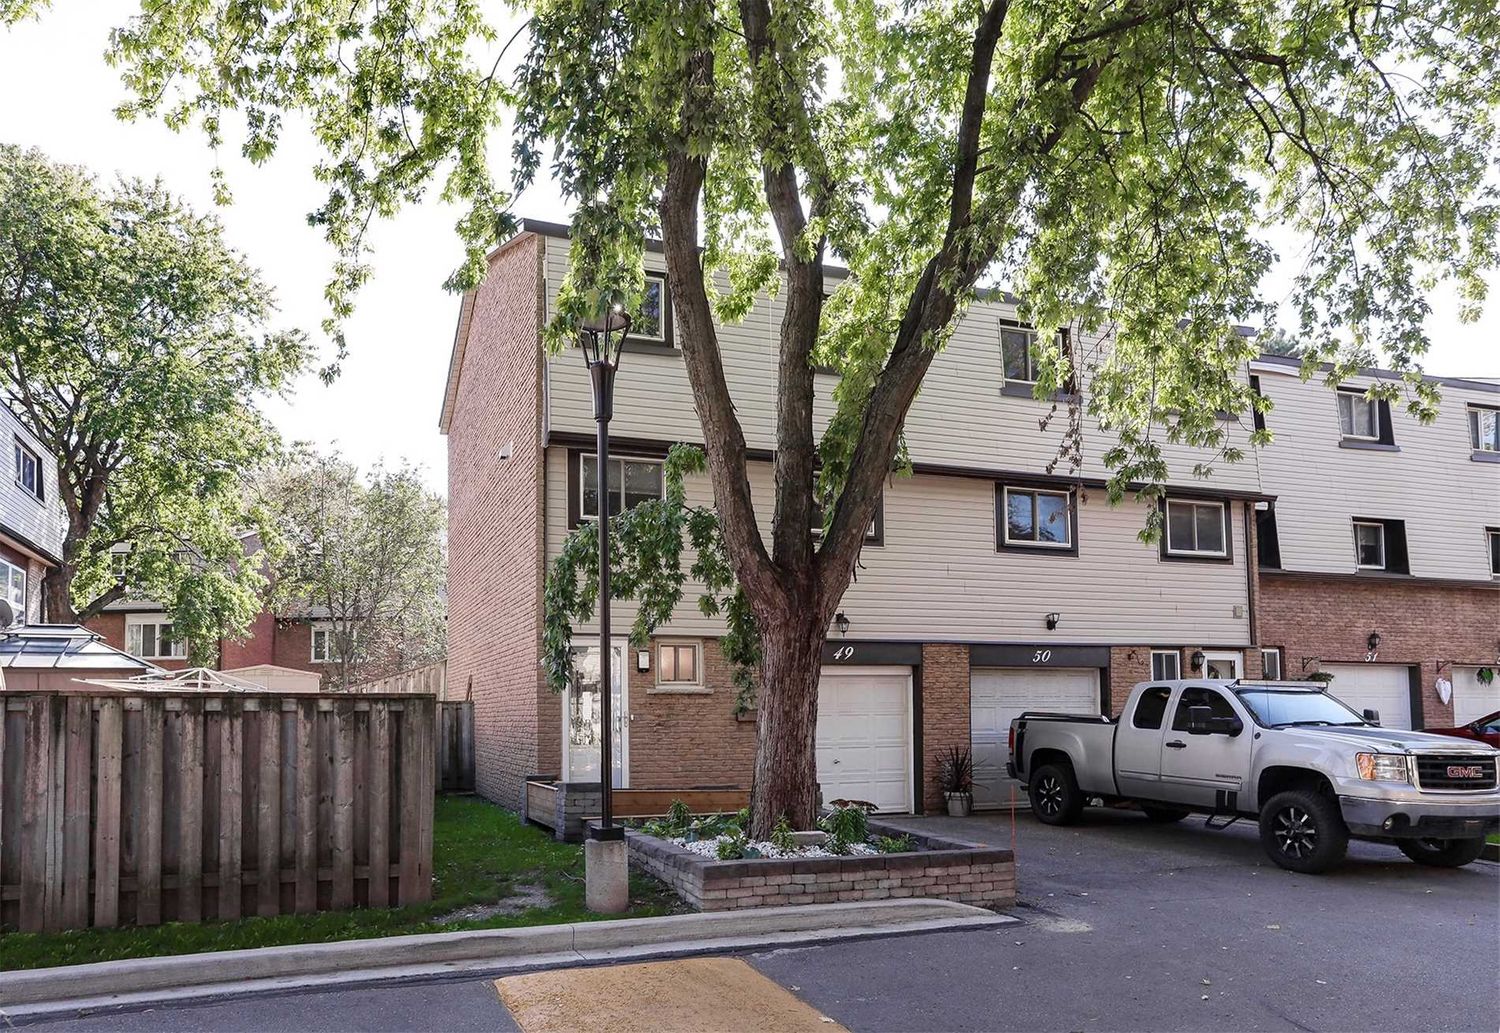 1945 Denmar Road. 1945 Denmar Townhomes is located in  Pickering, Toronto - image #2 of 2